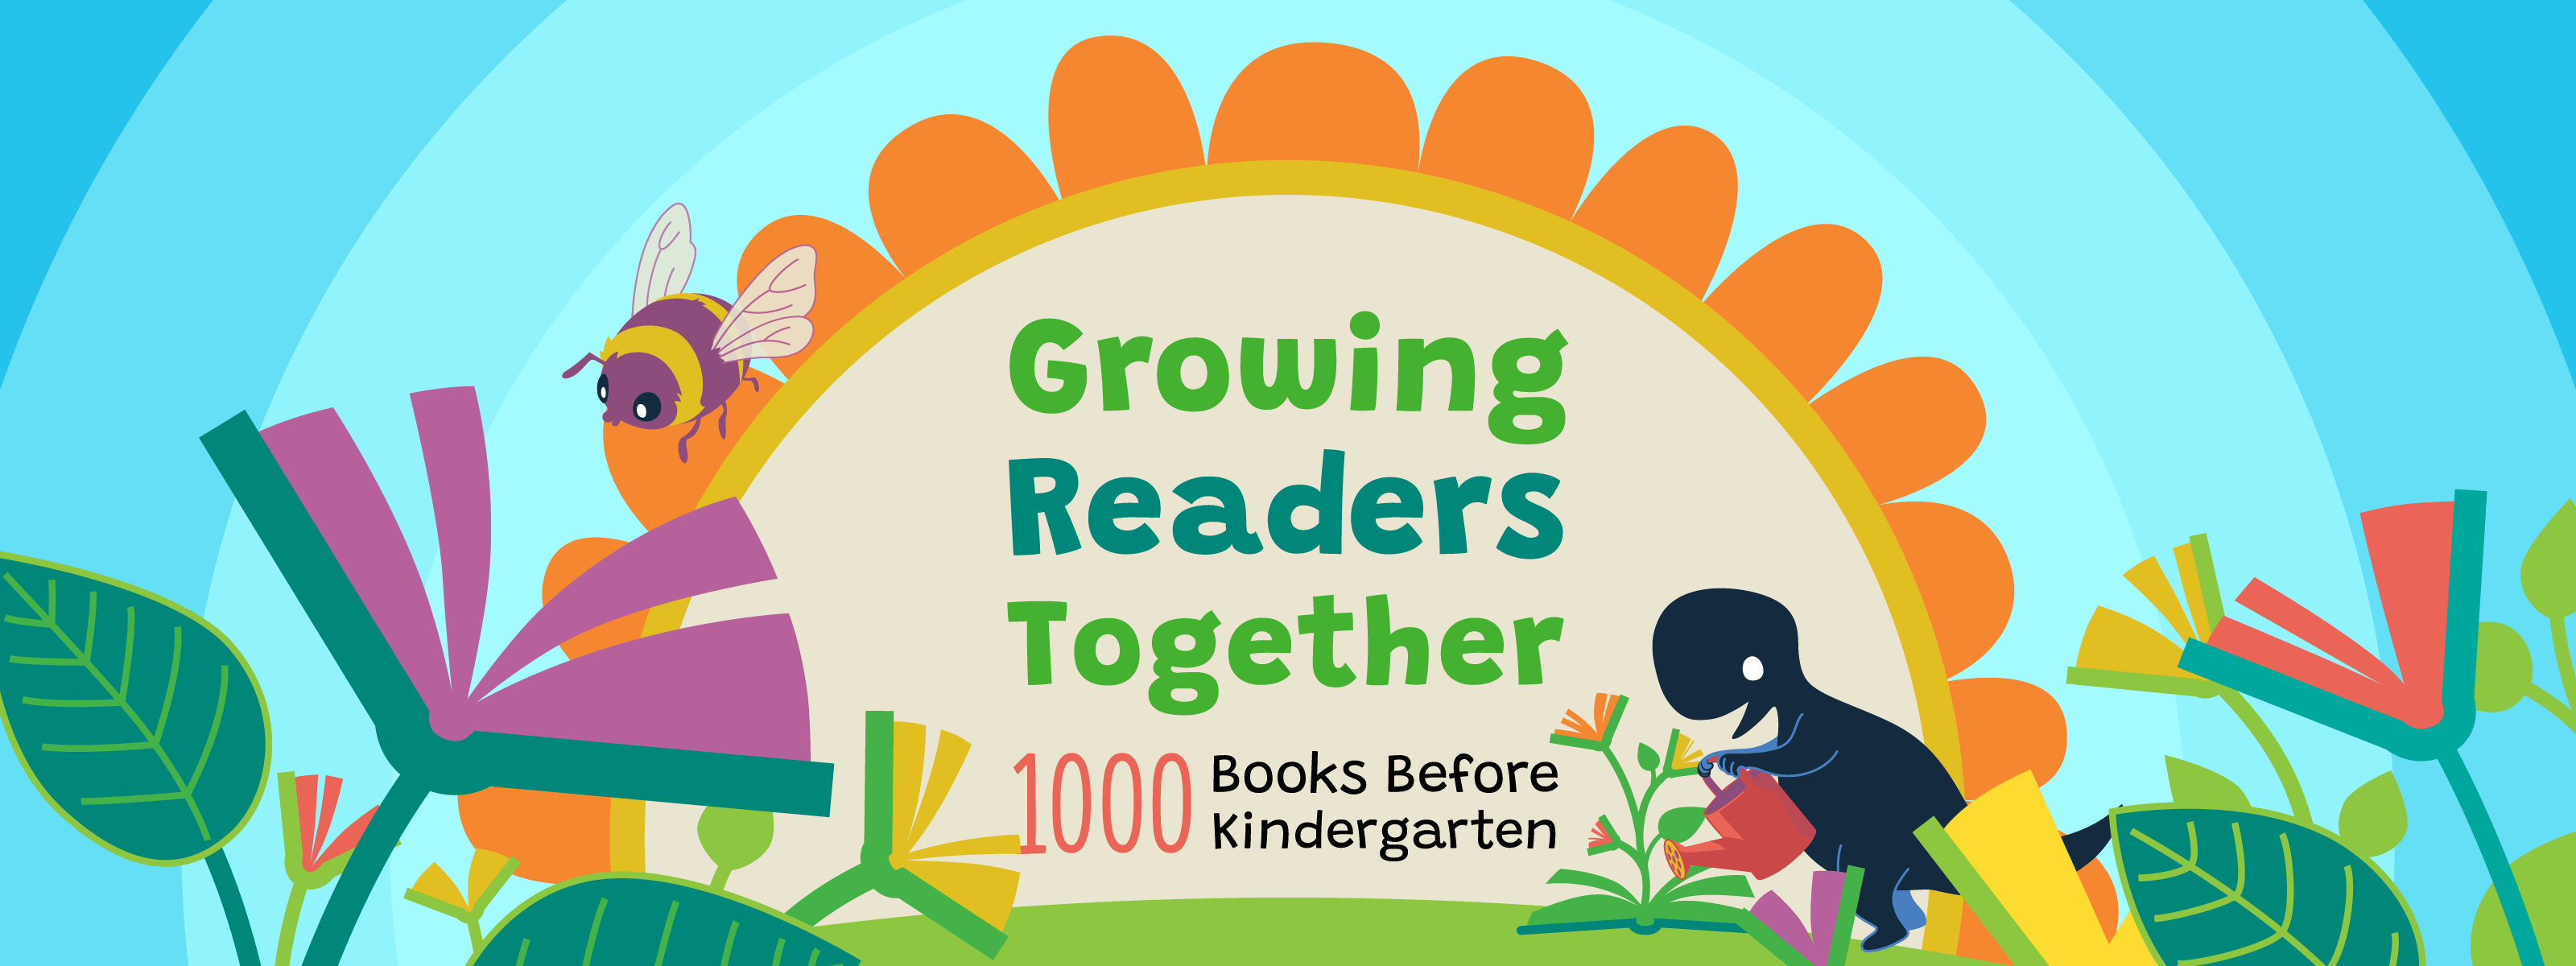 A cute dinosaur mascot waters flowering books alongside the Growing Readers Together logo